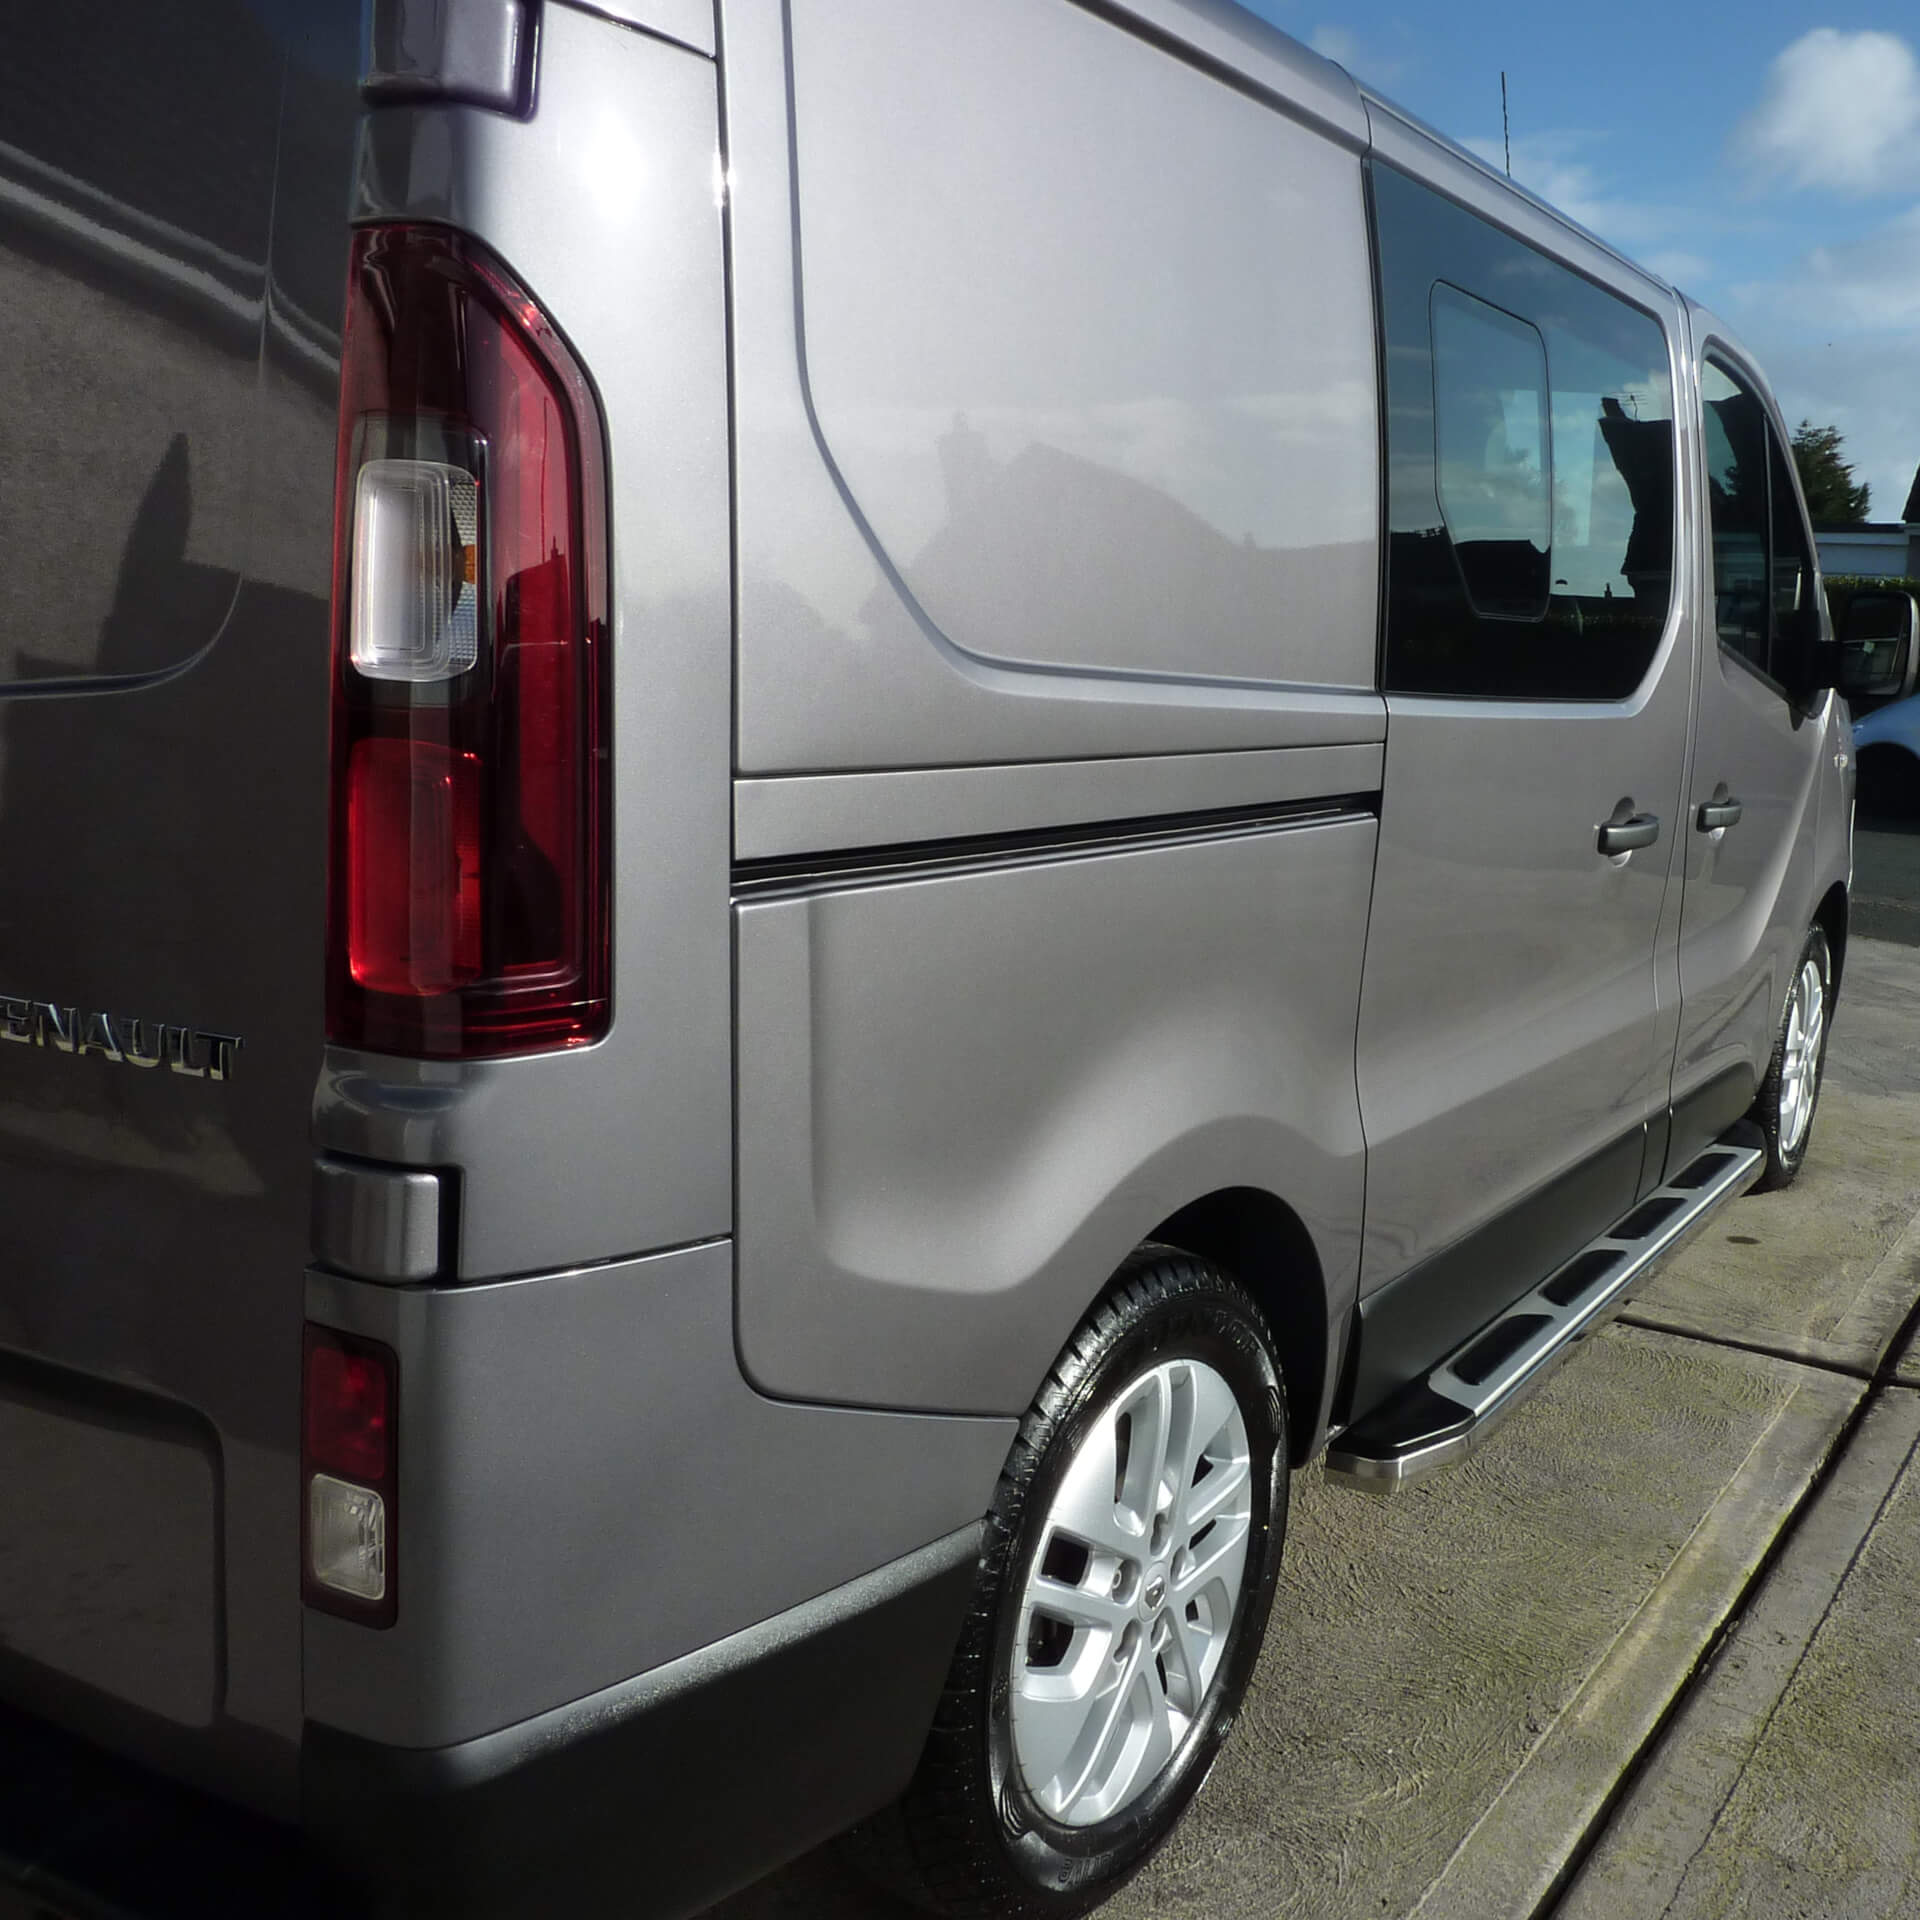 Direct4x4 accessories for Renault Trafic vehicles with a photo of the side of a Renault Trafic parked on a driveway fitted with our Suburban style side steps